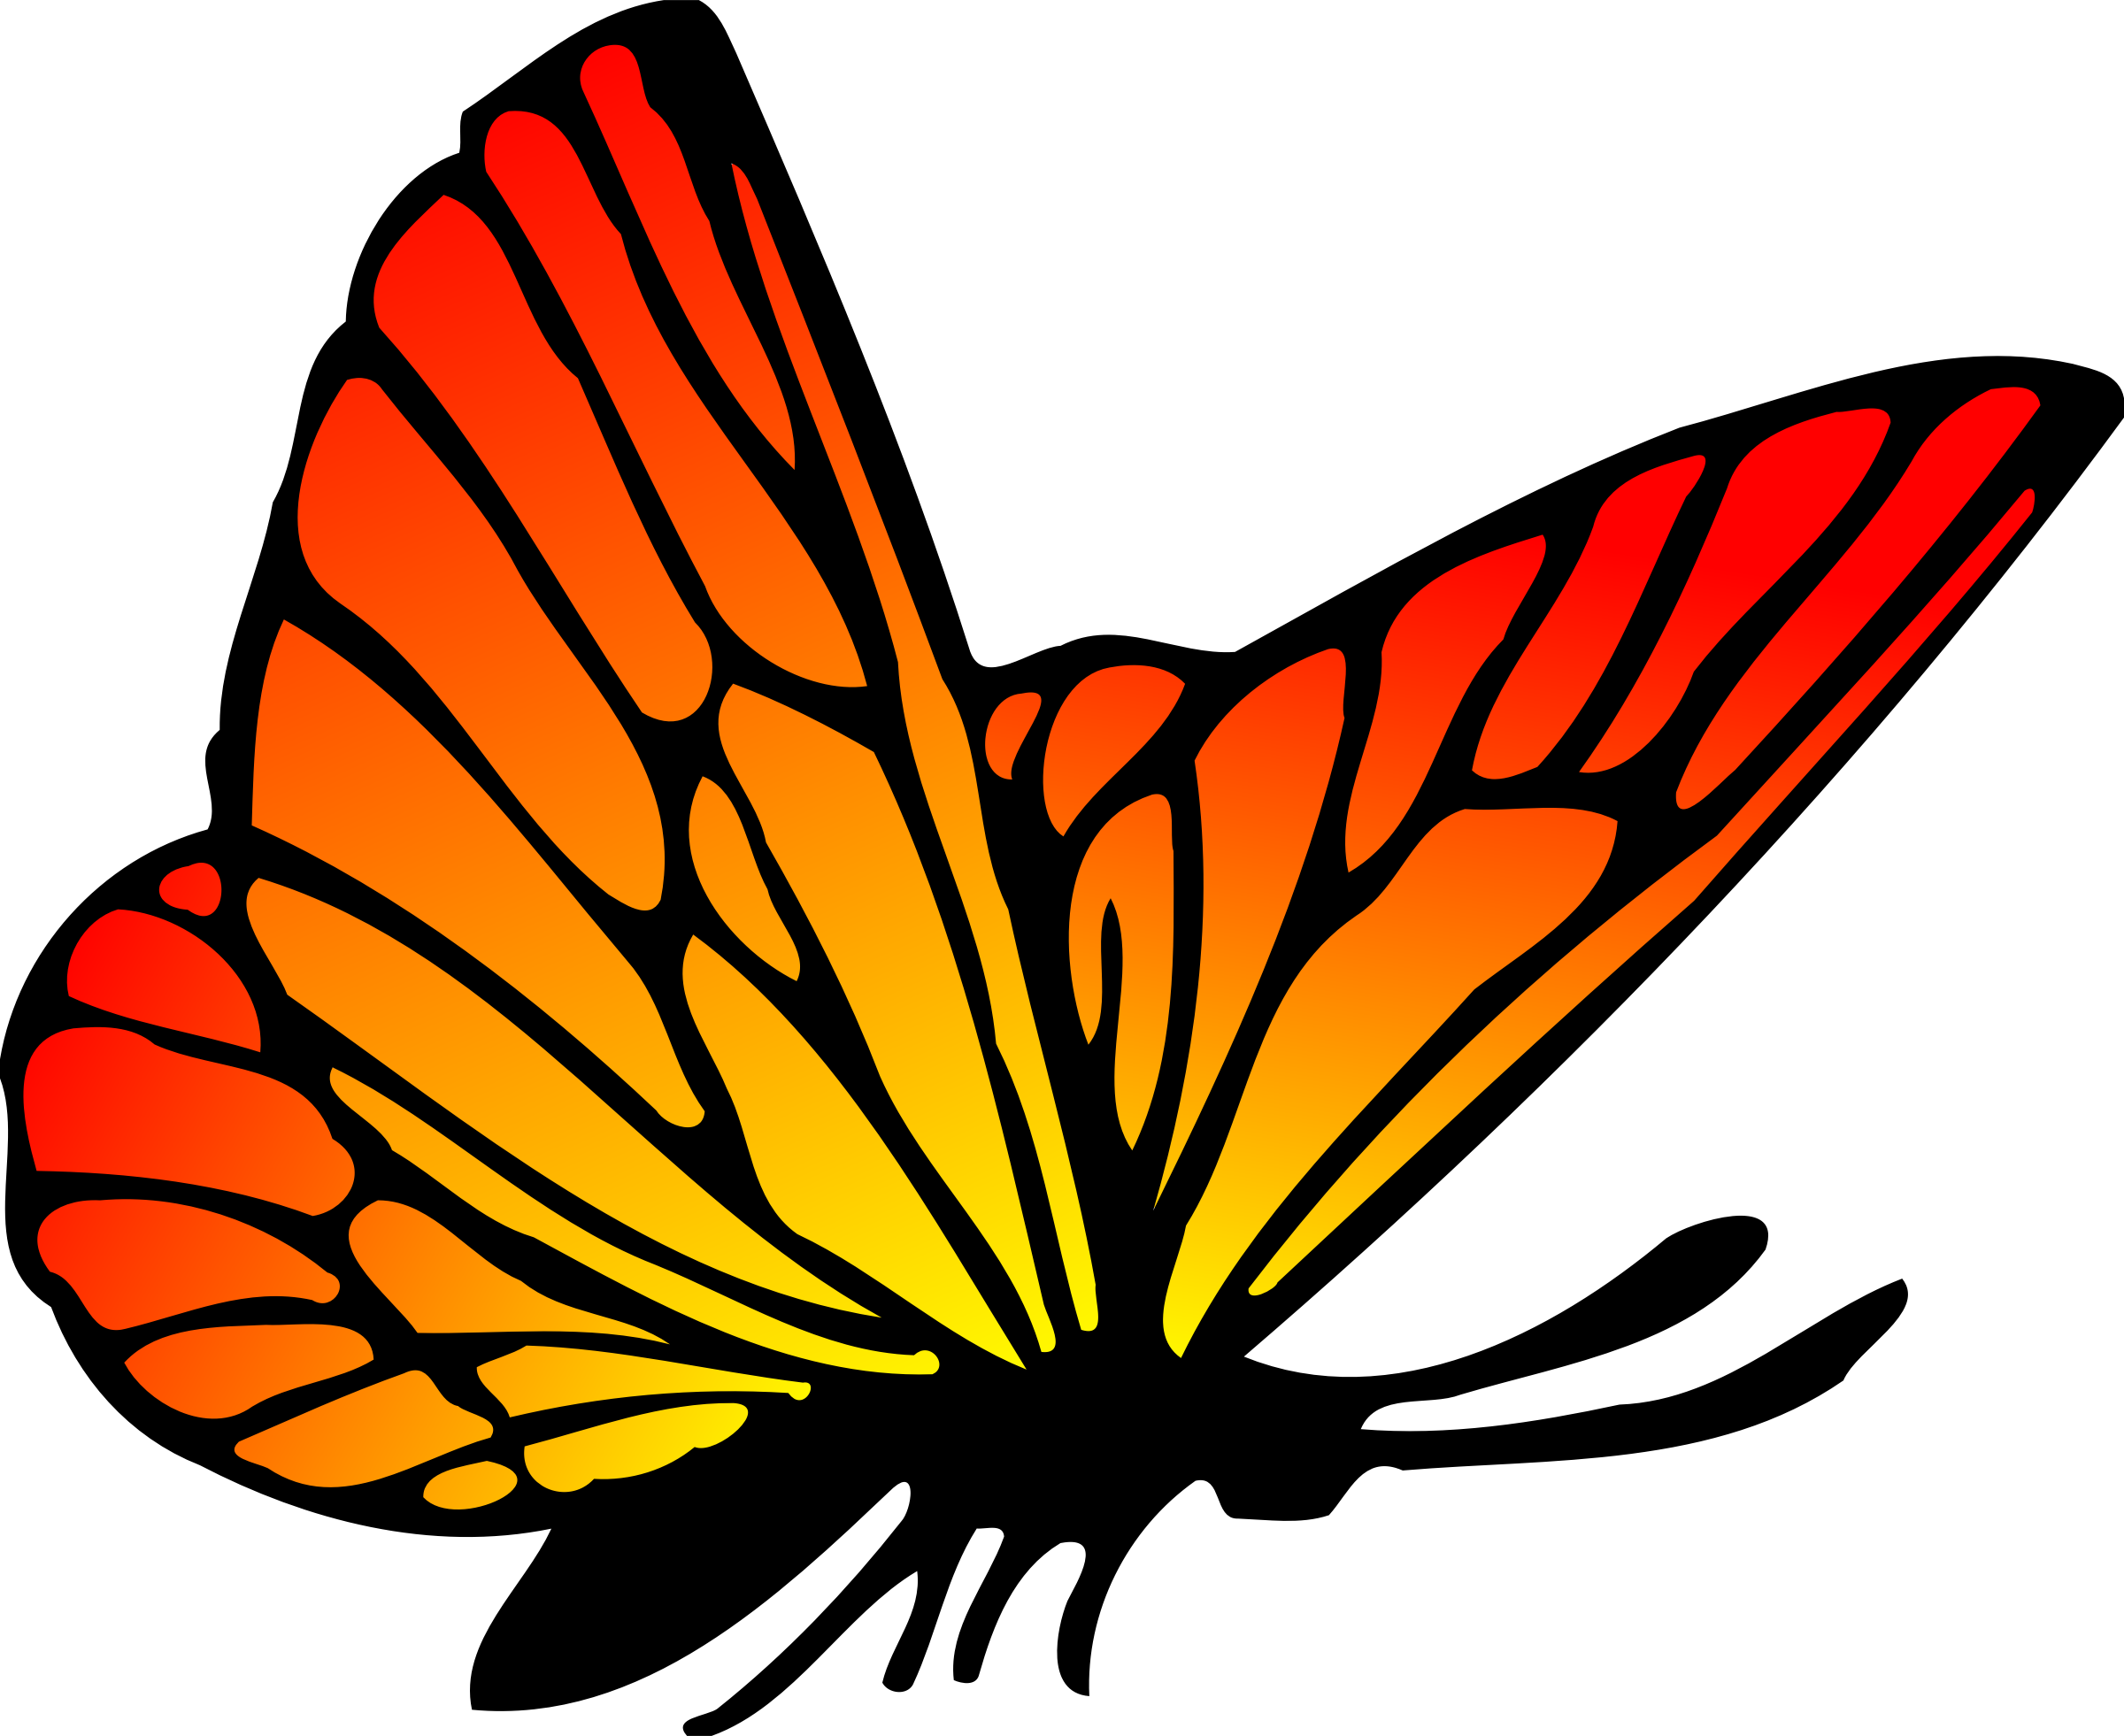 Red Orange Butterfly vector clipart image - Free stock photo - Public